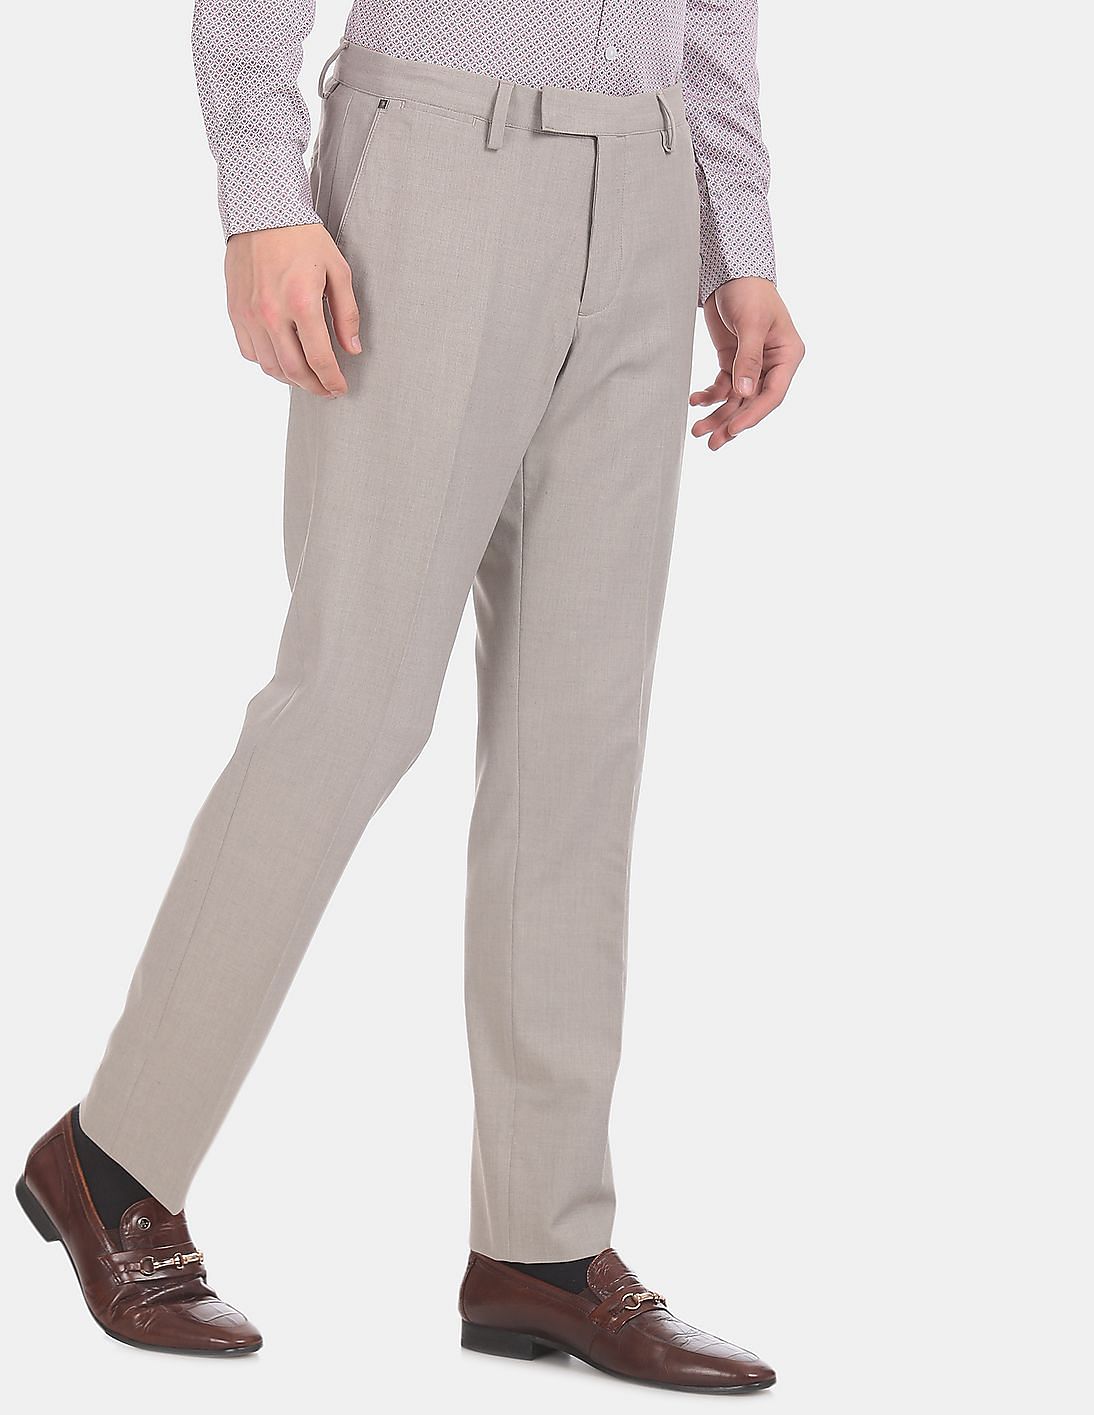 Buy USPA Tailored Men Beige Slim Fit Flat Front Formal Trousers - NNNOW.com